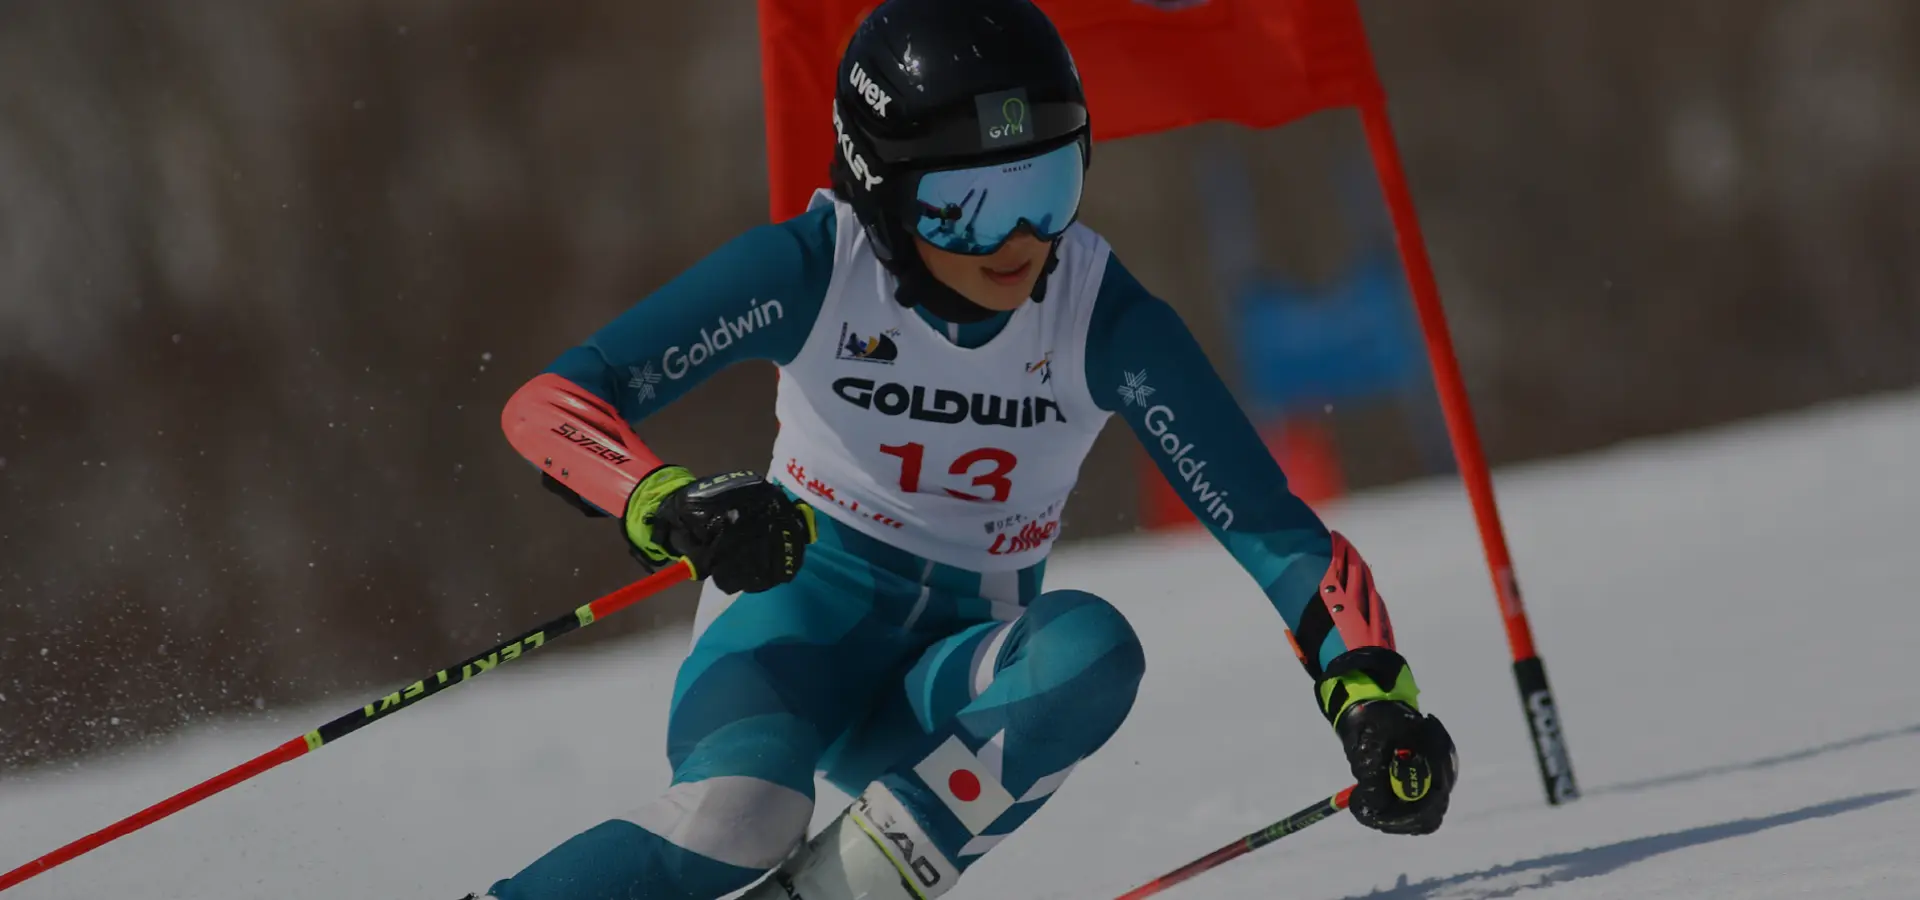 FIS YOUTH JAPAN CUP 2022